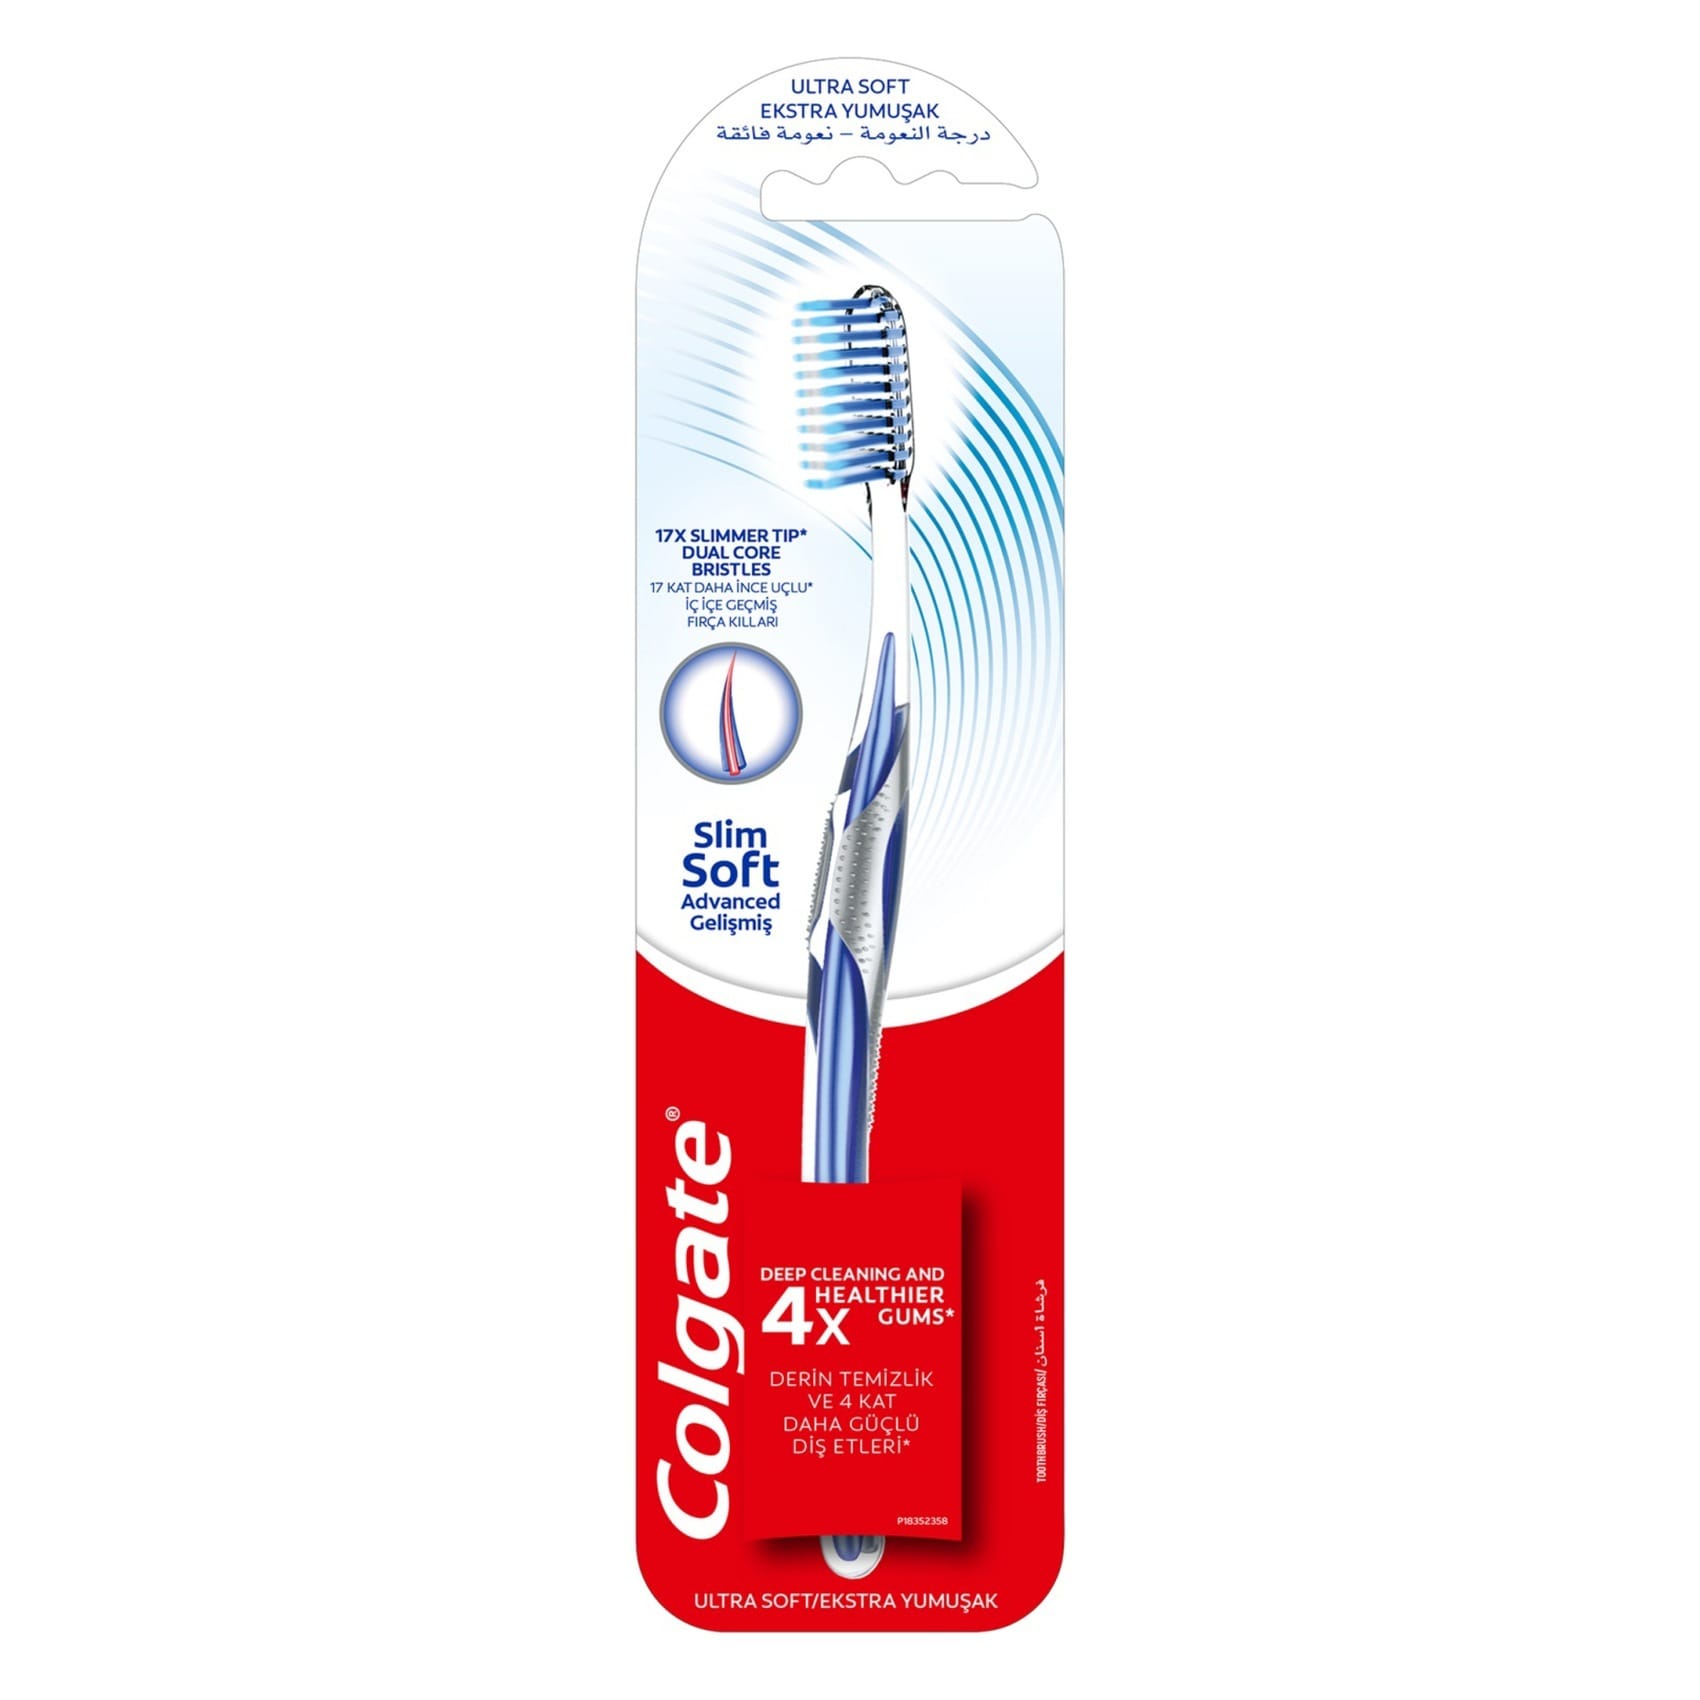 Colgate Slim Soft Advanced Toothbrushes Ultra Soft Value Pack - 1